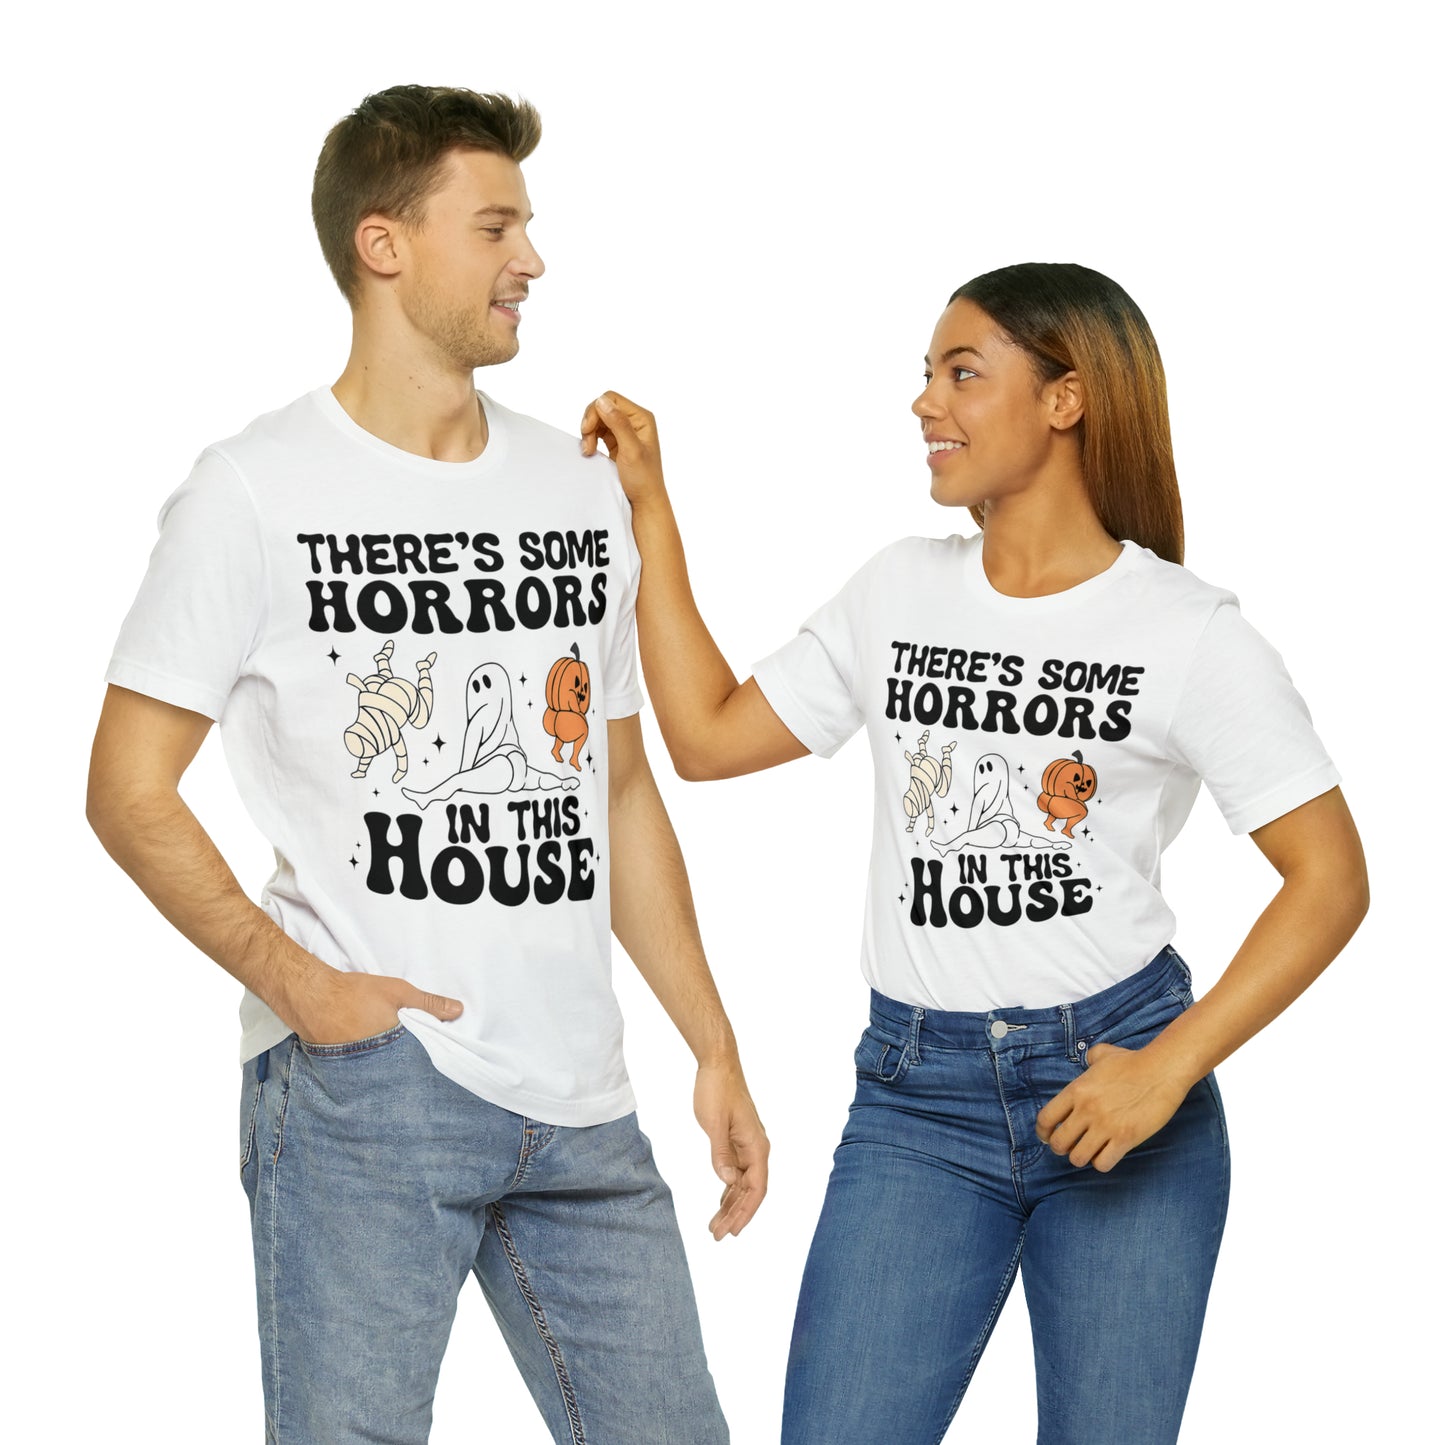 Horrors in this House Tee